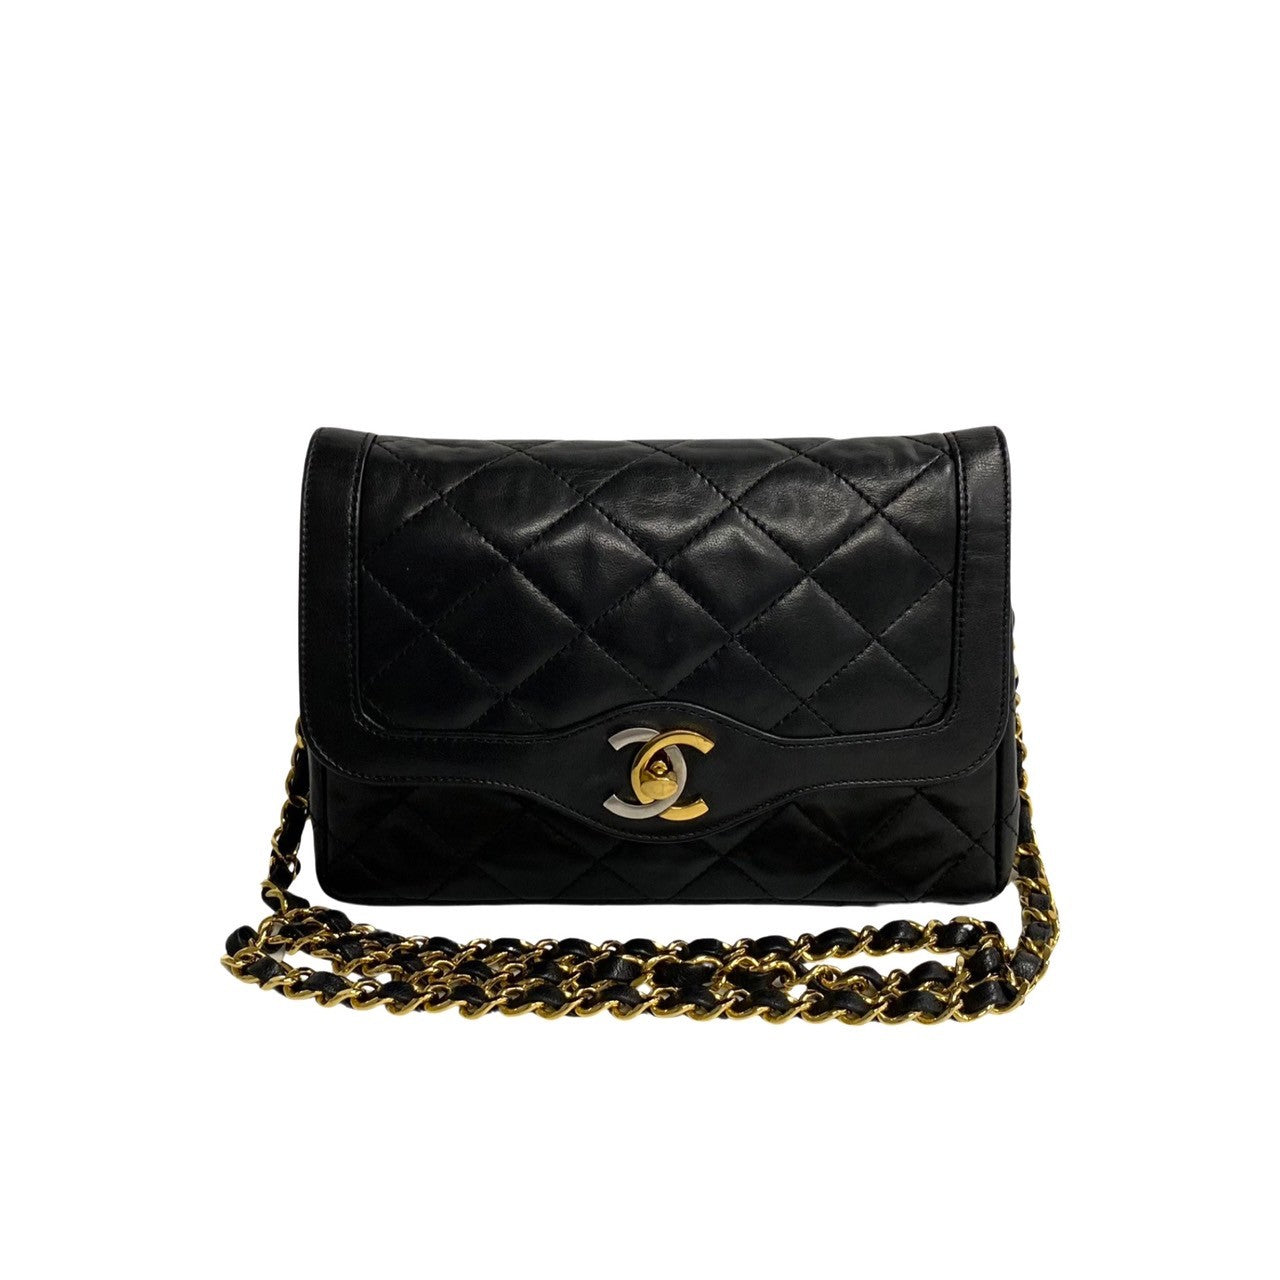 Chanel Paris Single Flap Bag Leather Crossbody Bag in Good condition